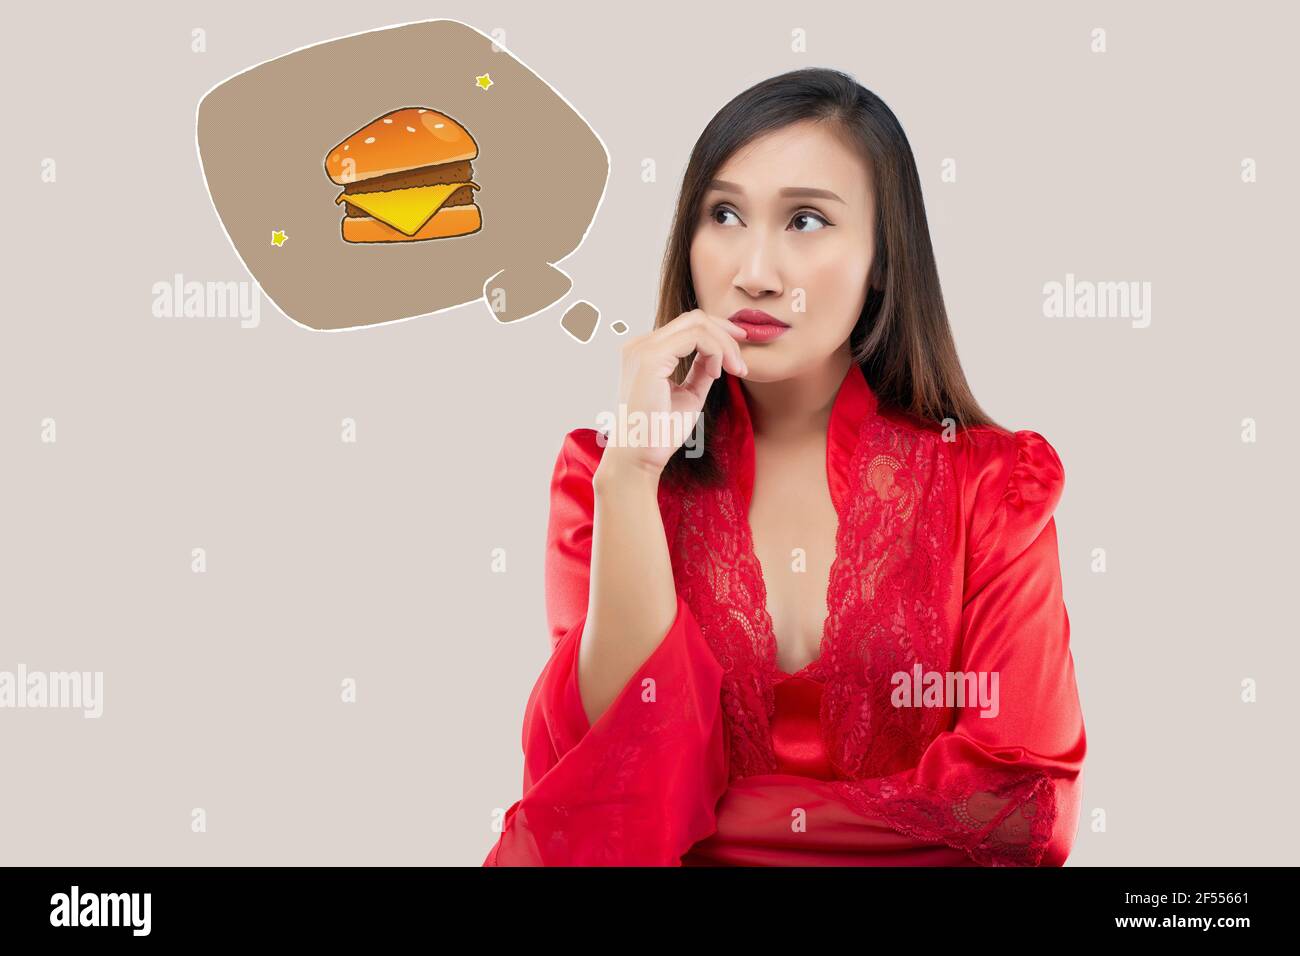 A woman want to eat hamburgers during the night. When a woman in a red satin nightgown and lace robe wake up hungry late at night. Food cravings Stock Photo